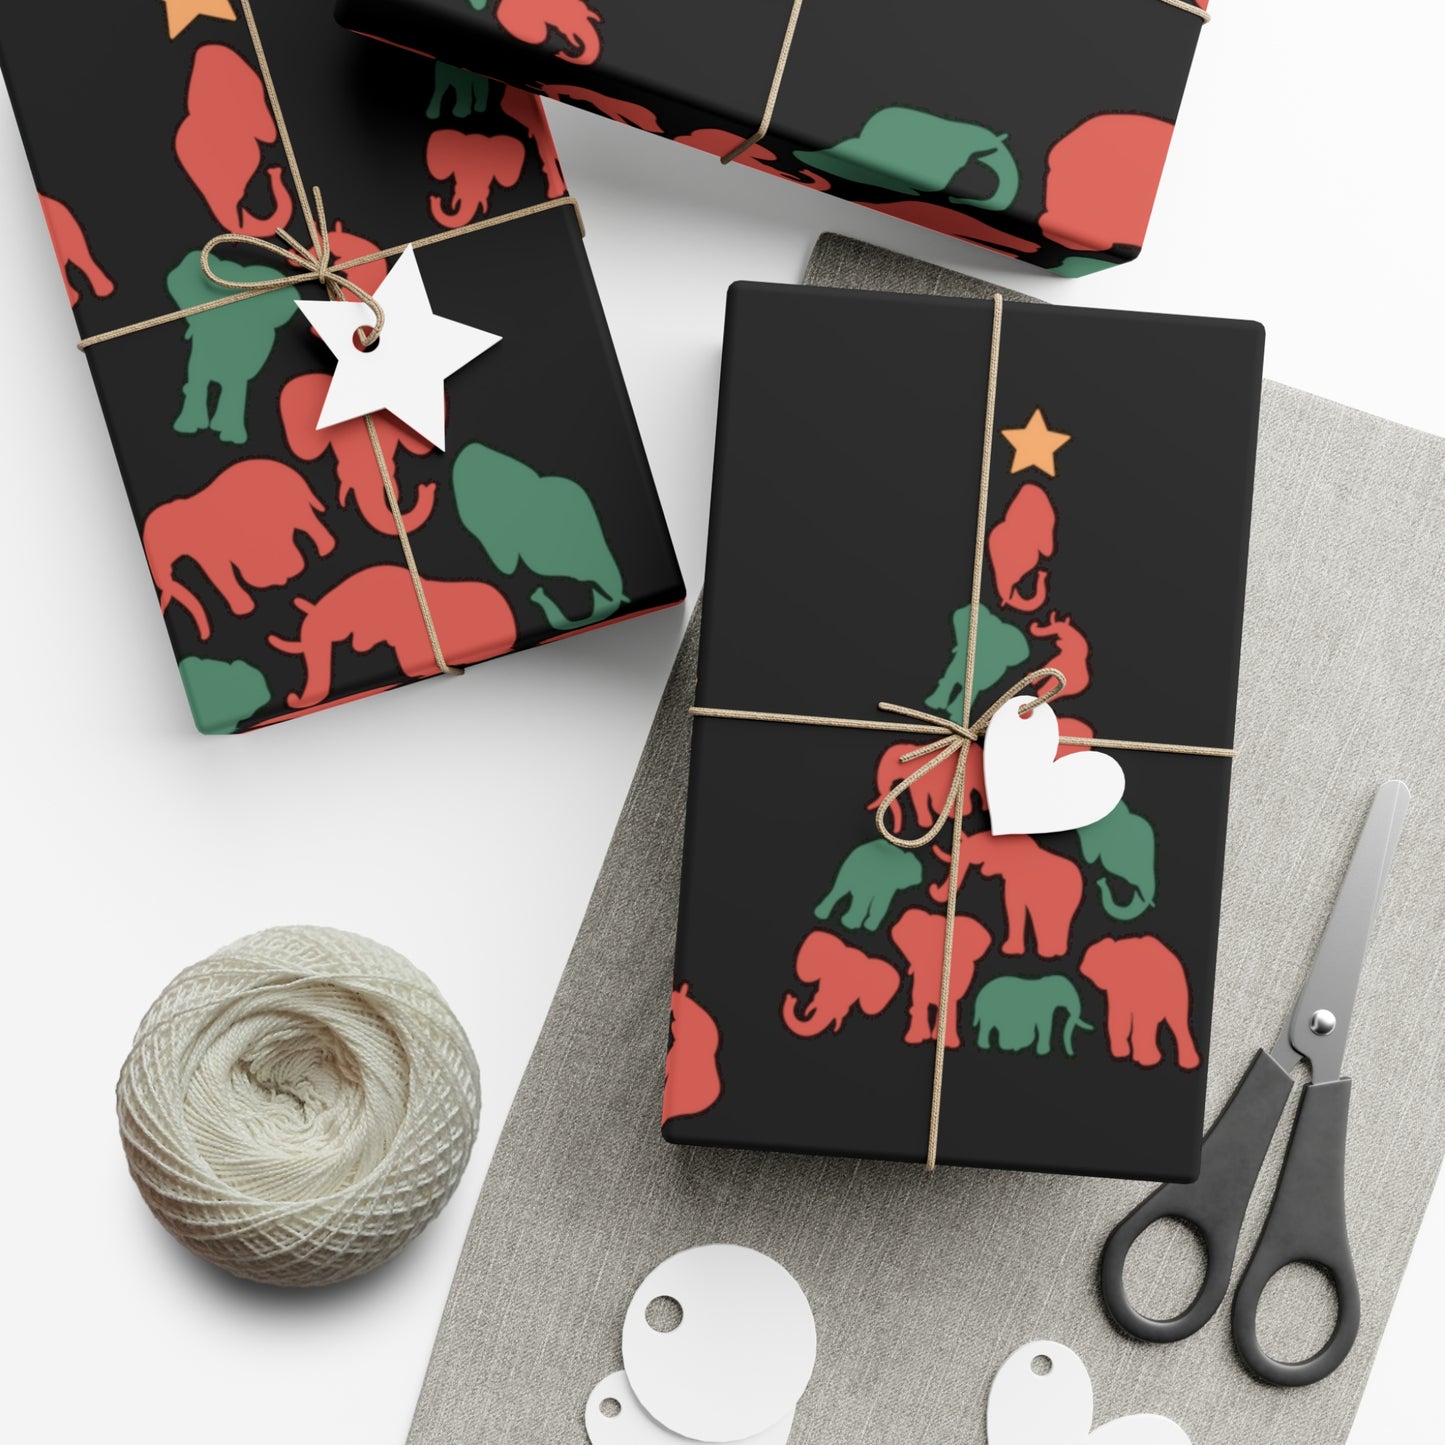 Elephant Tree on (black) Gift Wrap Papers